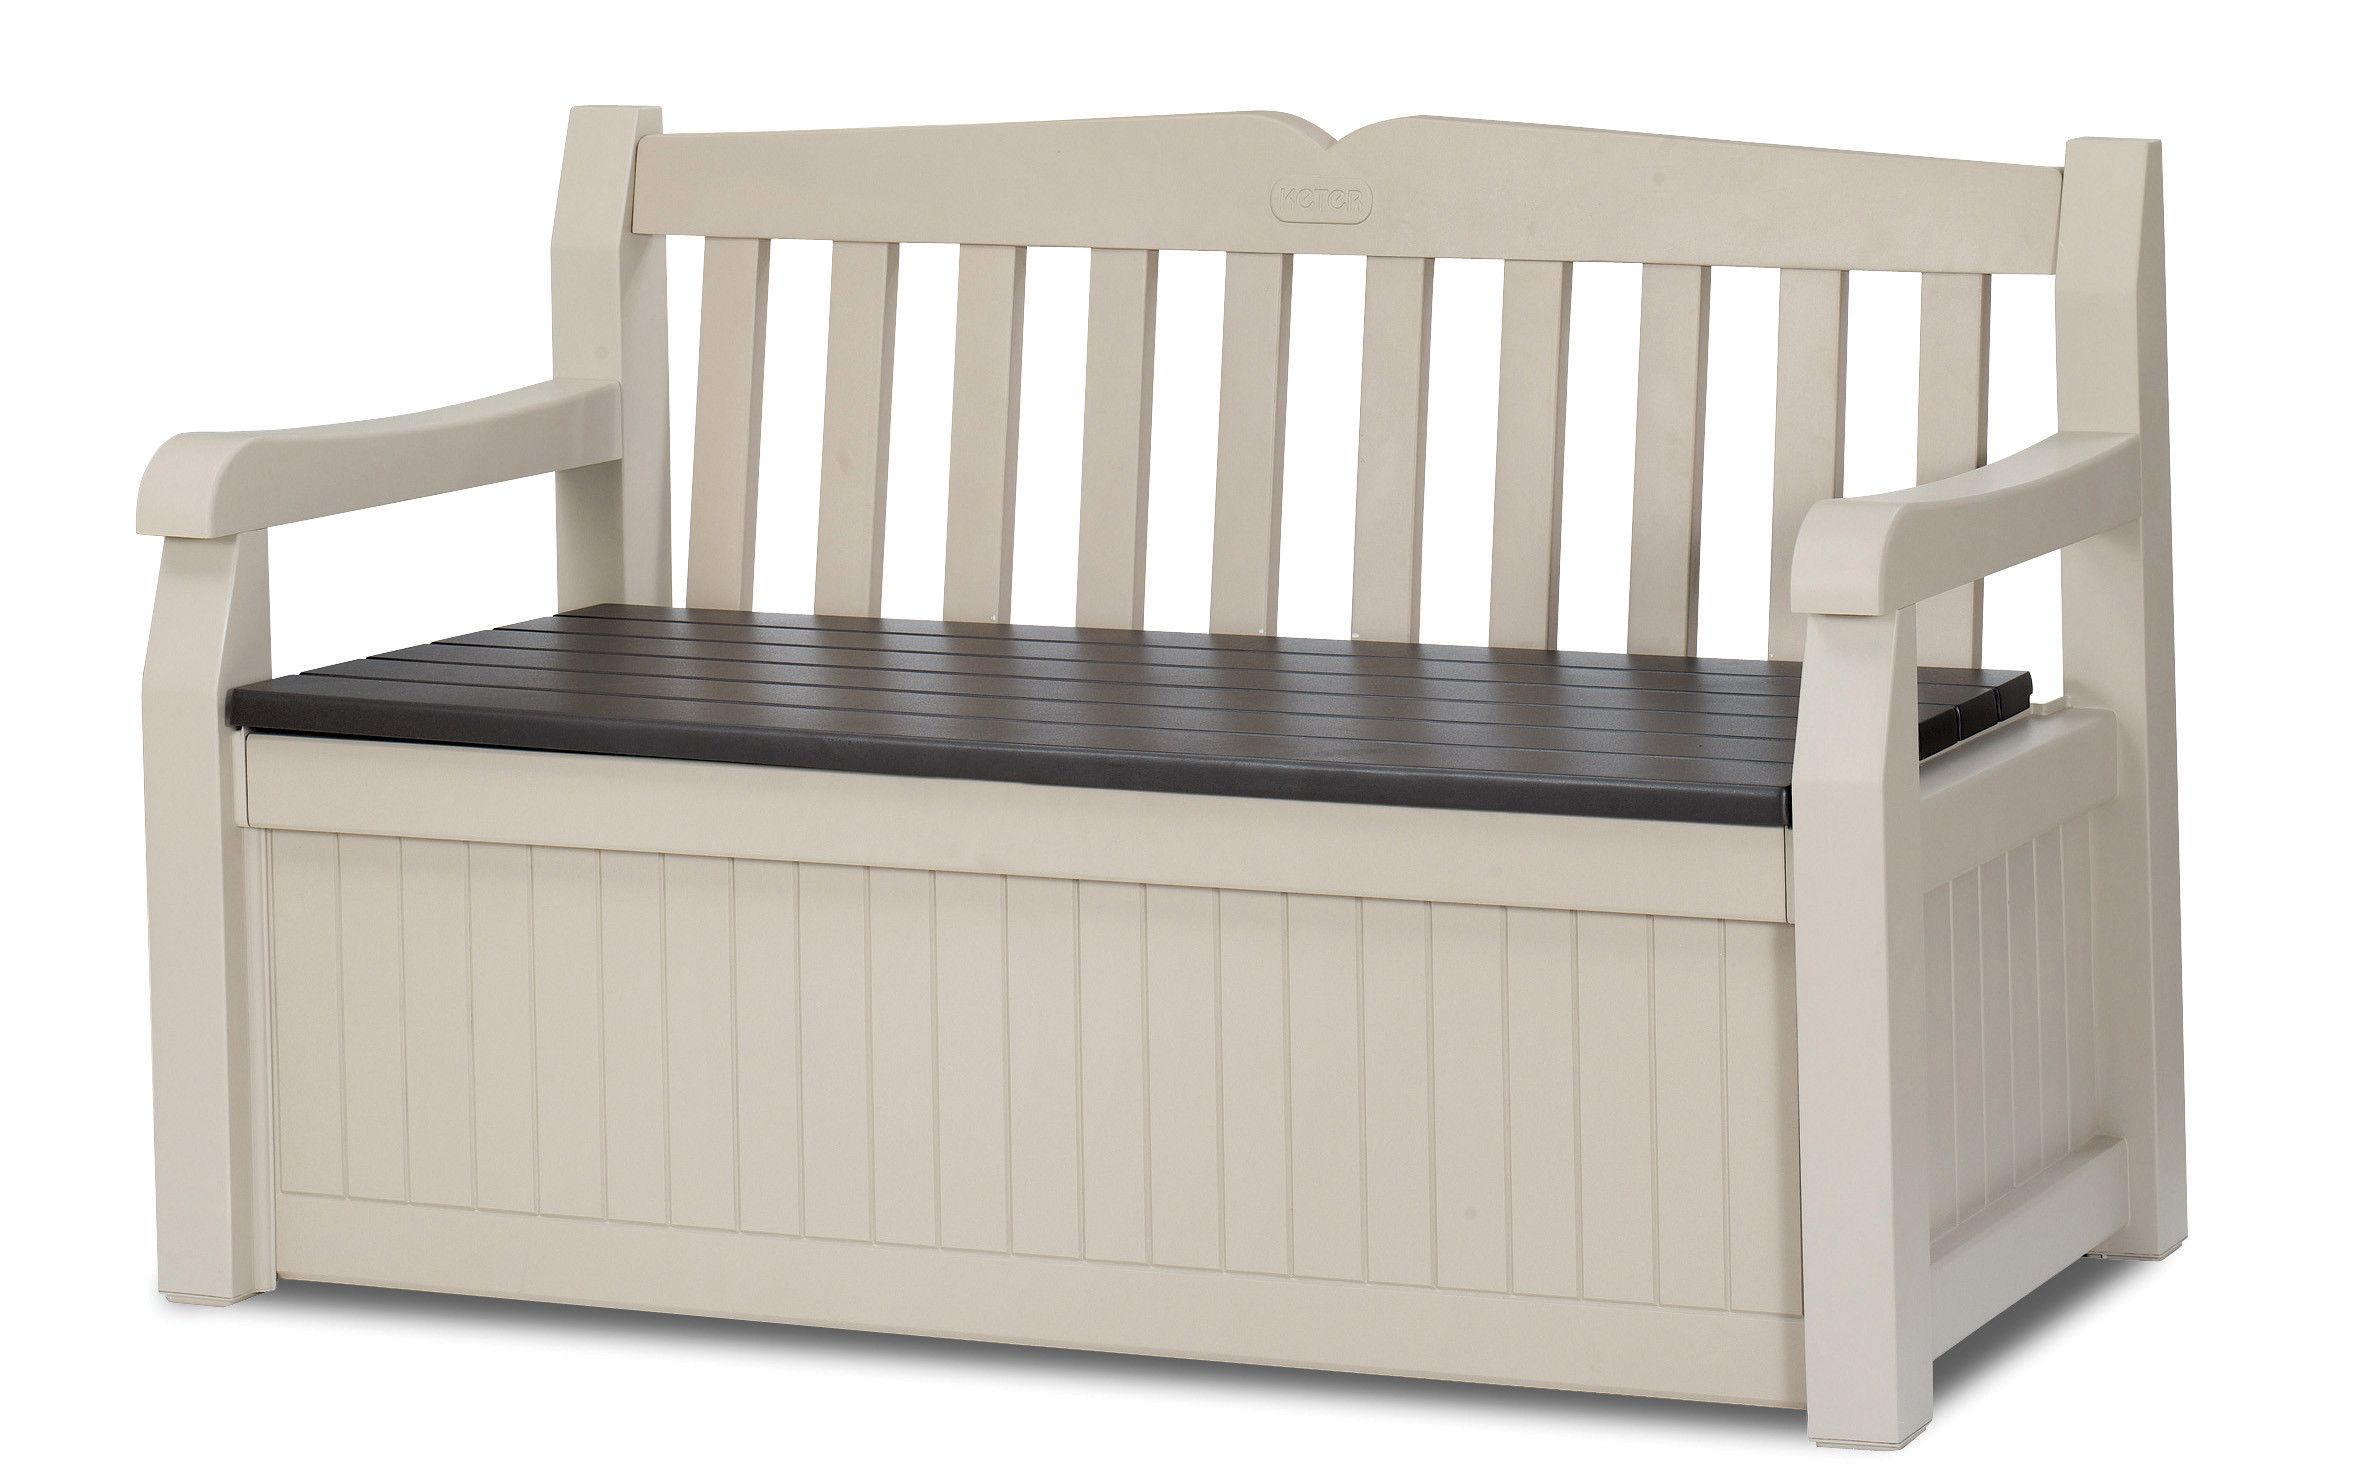 Costco Outdoor Storage Bench
 Decks Enhance Your Outdoor Accessory With 150 Gallon Deck